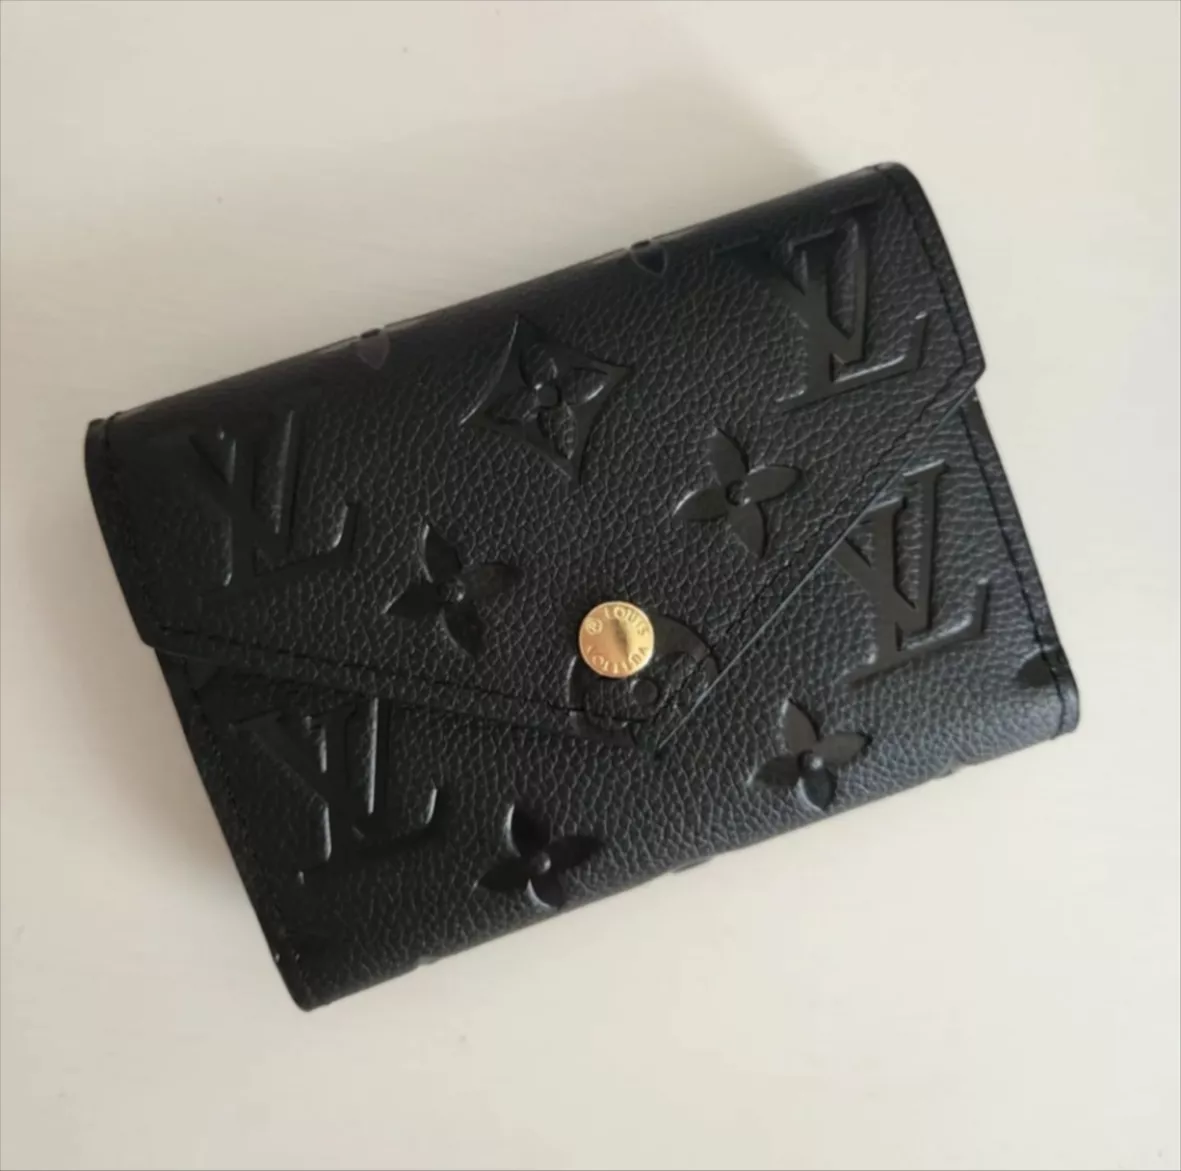 If you need a card holder, I recommend this piece. #louisvuitton